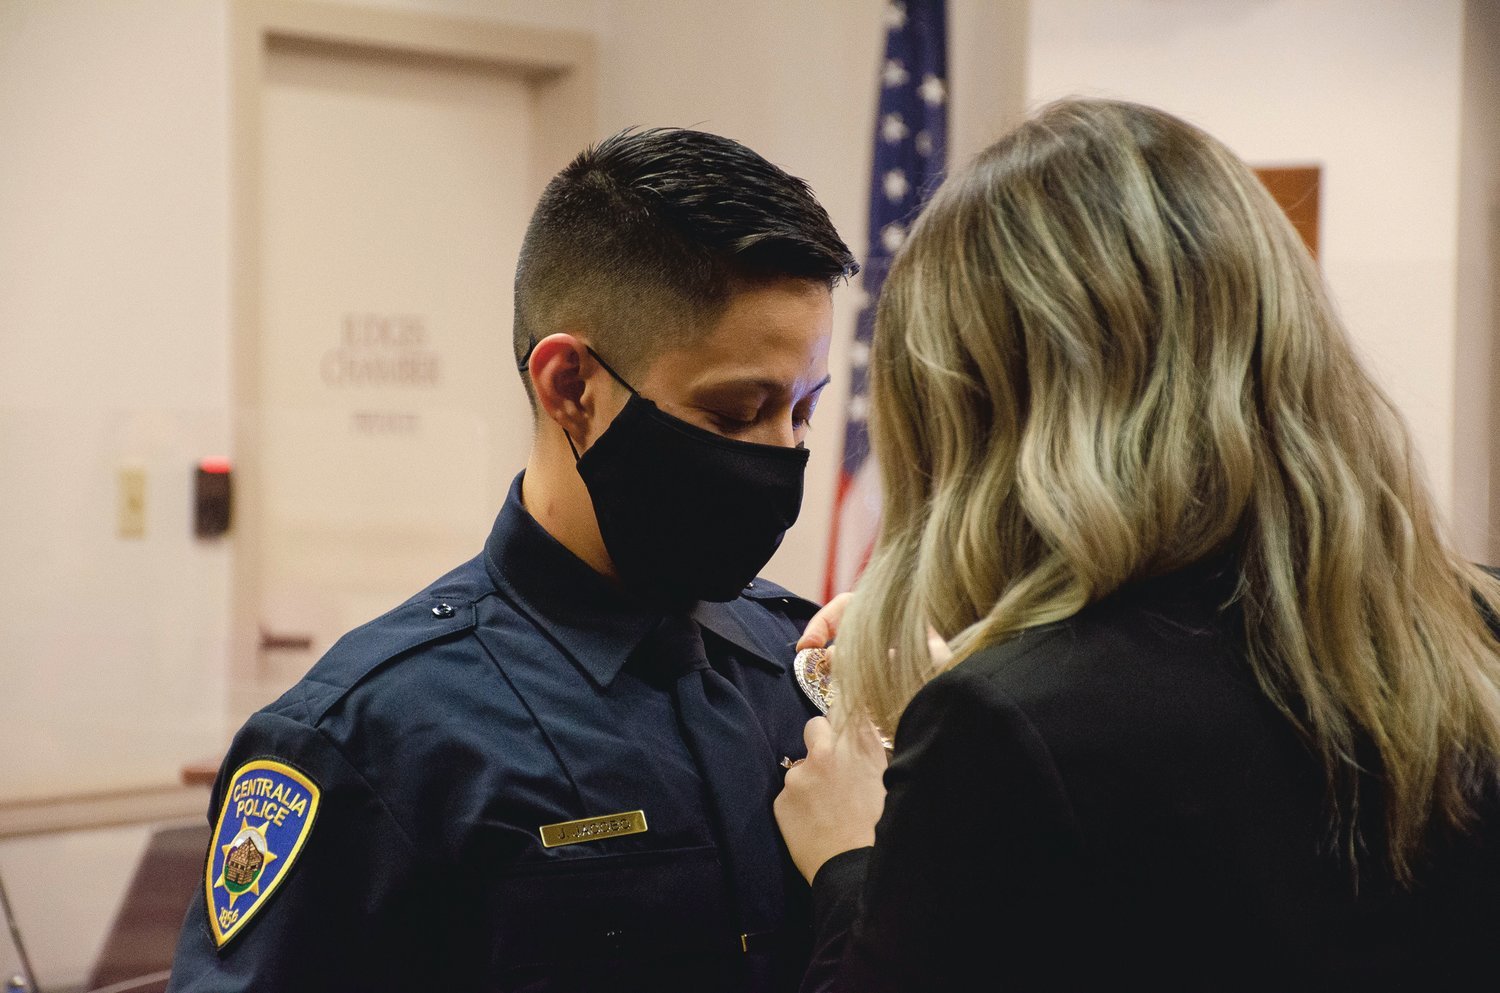 Winlock native Julie Jacobo was sworn in as an officer with the Centralia Police Department during a January Centralia City Council meeting. She read the Law Enforcement Code of Ethics and her oath of office was administered by police Chief Stacy Denham. Shortly after, Jacobo’s badge was ceremonially pinned to her uniform by wife Kalyn Jacobo. Jacobo comes to the job with five years of law enforcement experience, mostly with Lewis County Sheriff’s Office and Lewis County corrections. She also has experience as a SWAT team member, Swiftwater Rescue Team member, Lewis County JNET detective and a general investigations detective. “In this case, it became very clear to me that Officer Jacobo has an impeccable reputation, she’s a hard worker, is accountable, ethical and a very determined individual,” Denham said, adding that it was an “extremely easy” decision to hire her. According to Denham, Jacobo enjoys spending time with her wife and two sons, hiking, working out, playing in the snow and swimming.